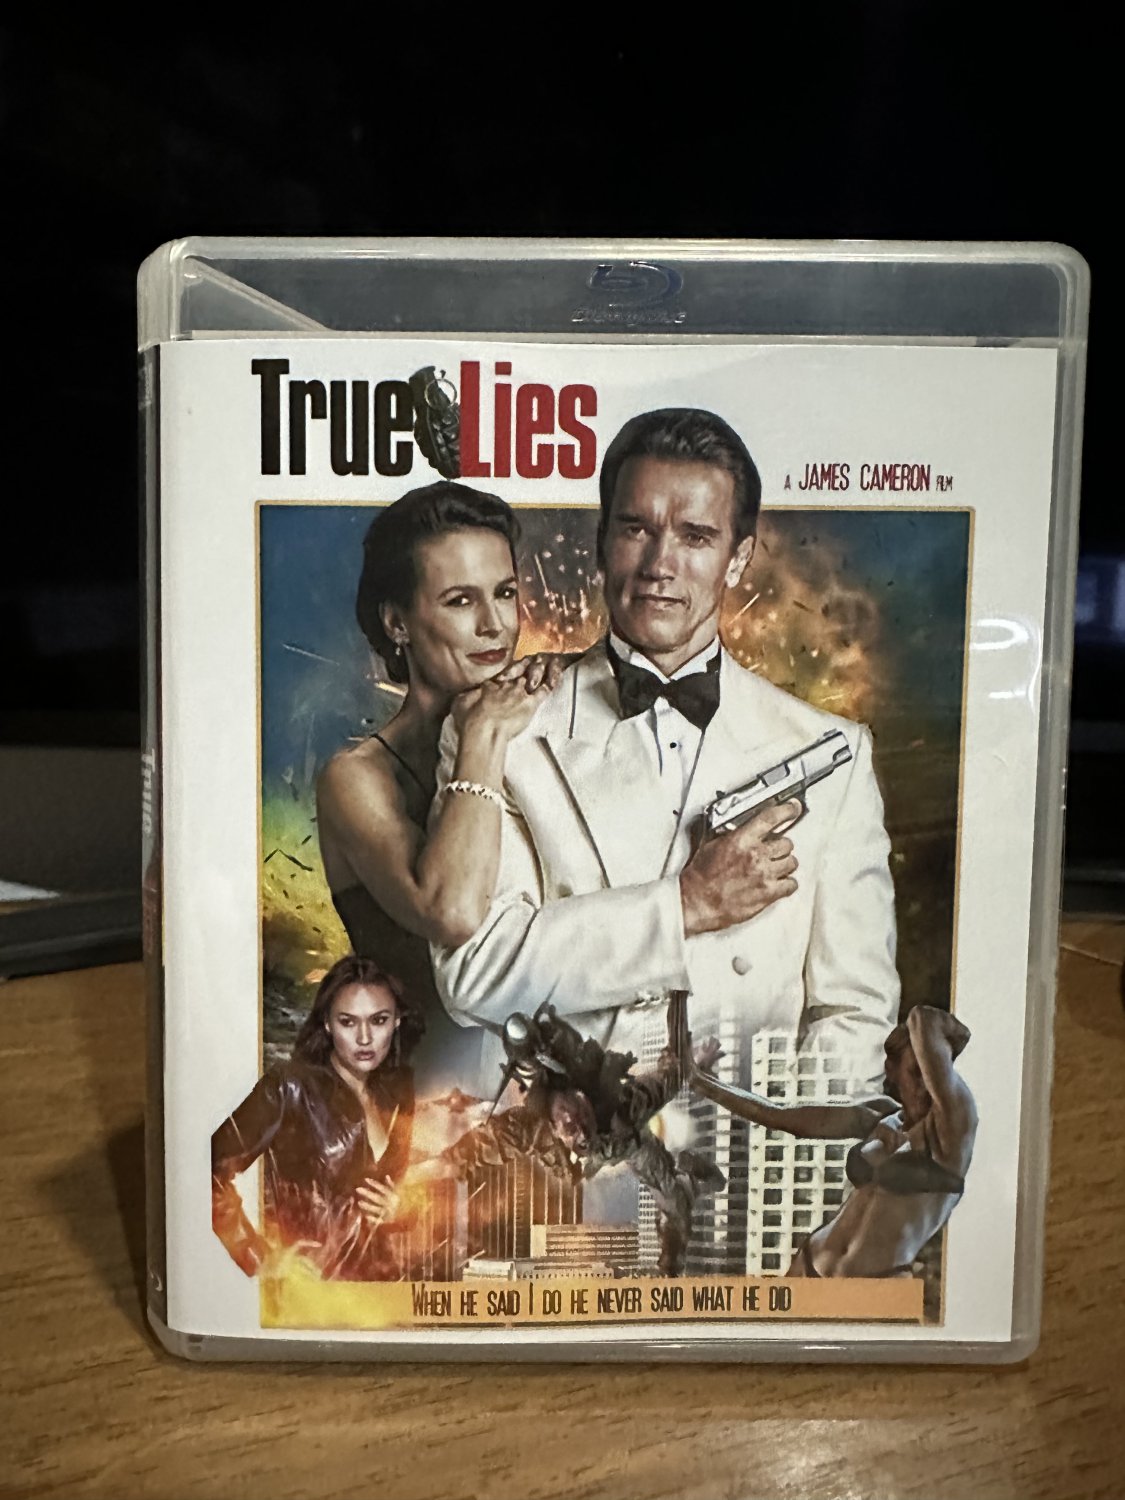  BLU-RAY: TRUE LIES (Packed with SPECIAL FEATURES) 1080p HD - REG. Free (Schwarzenegger)